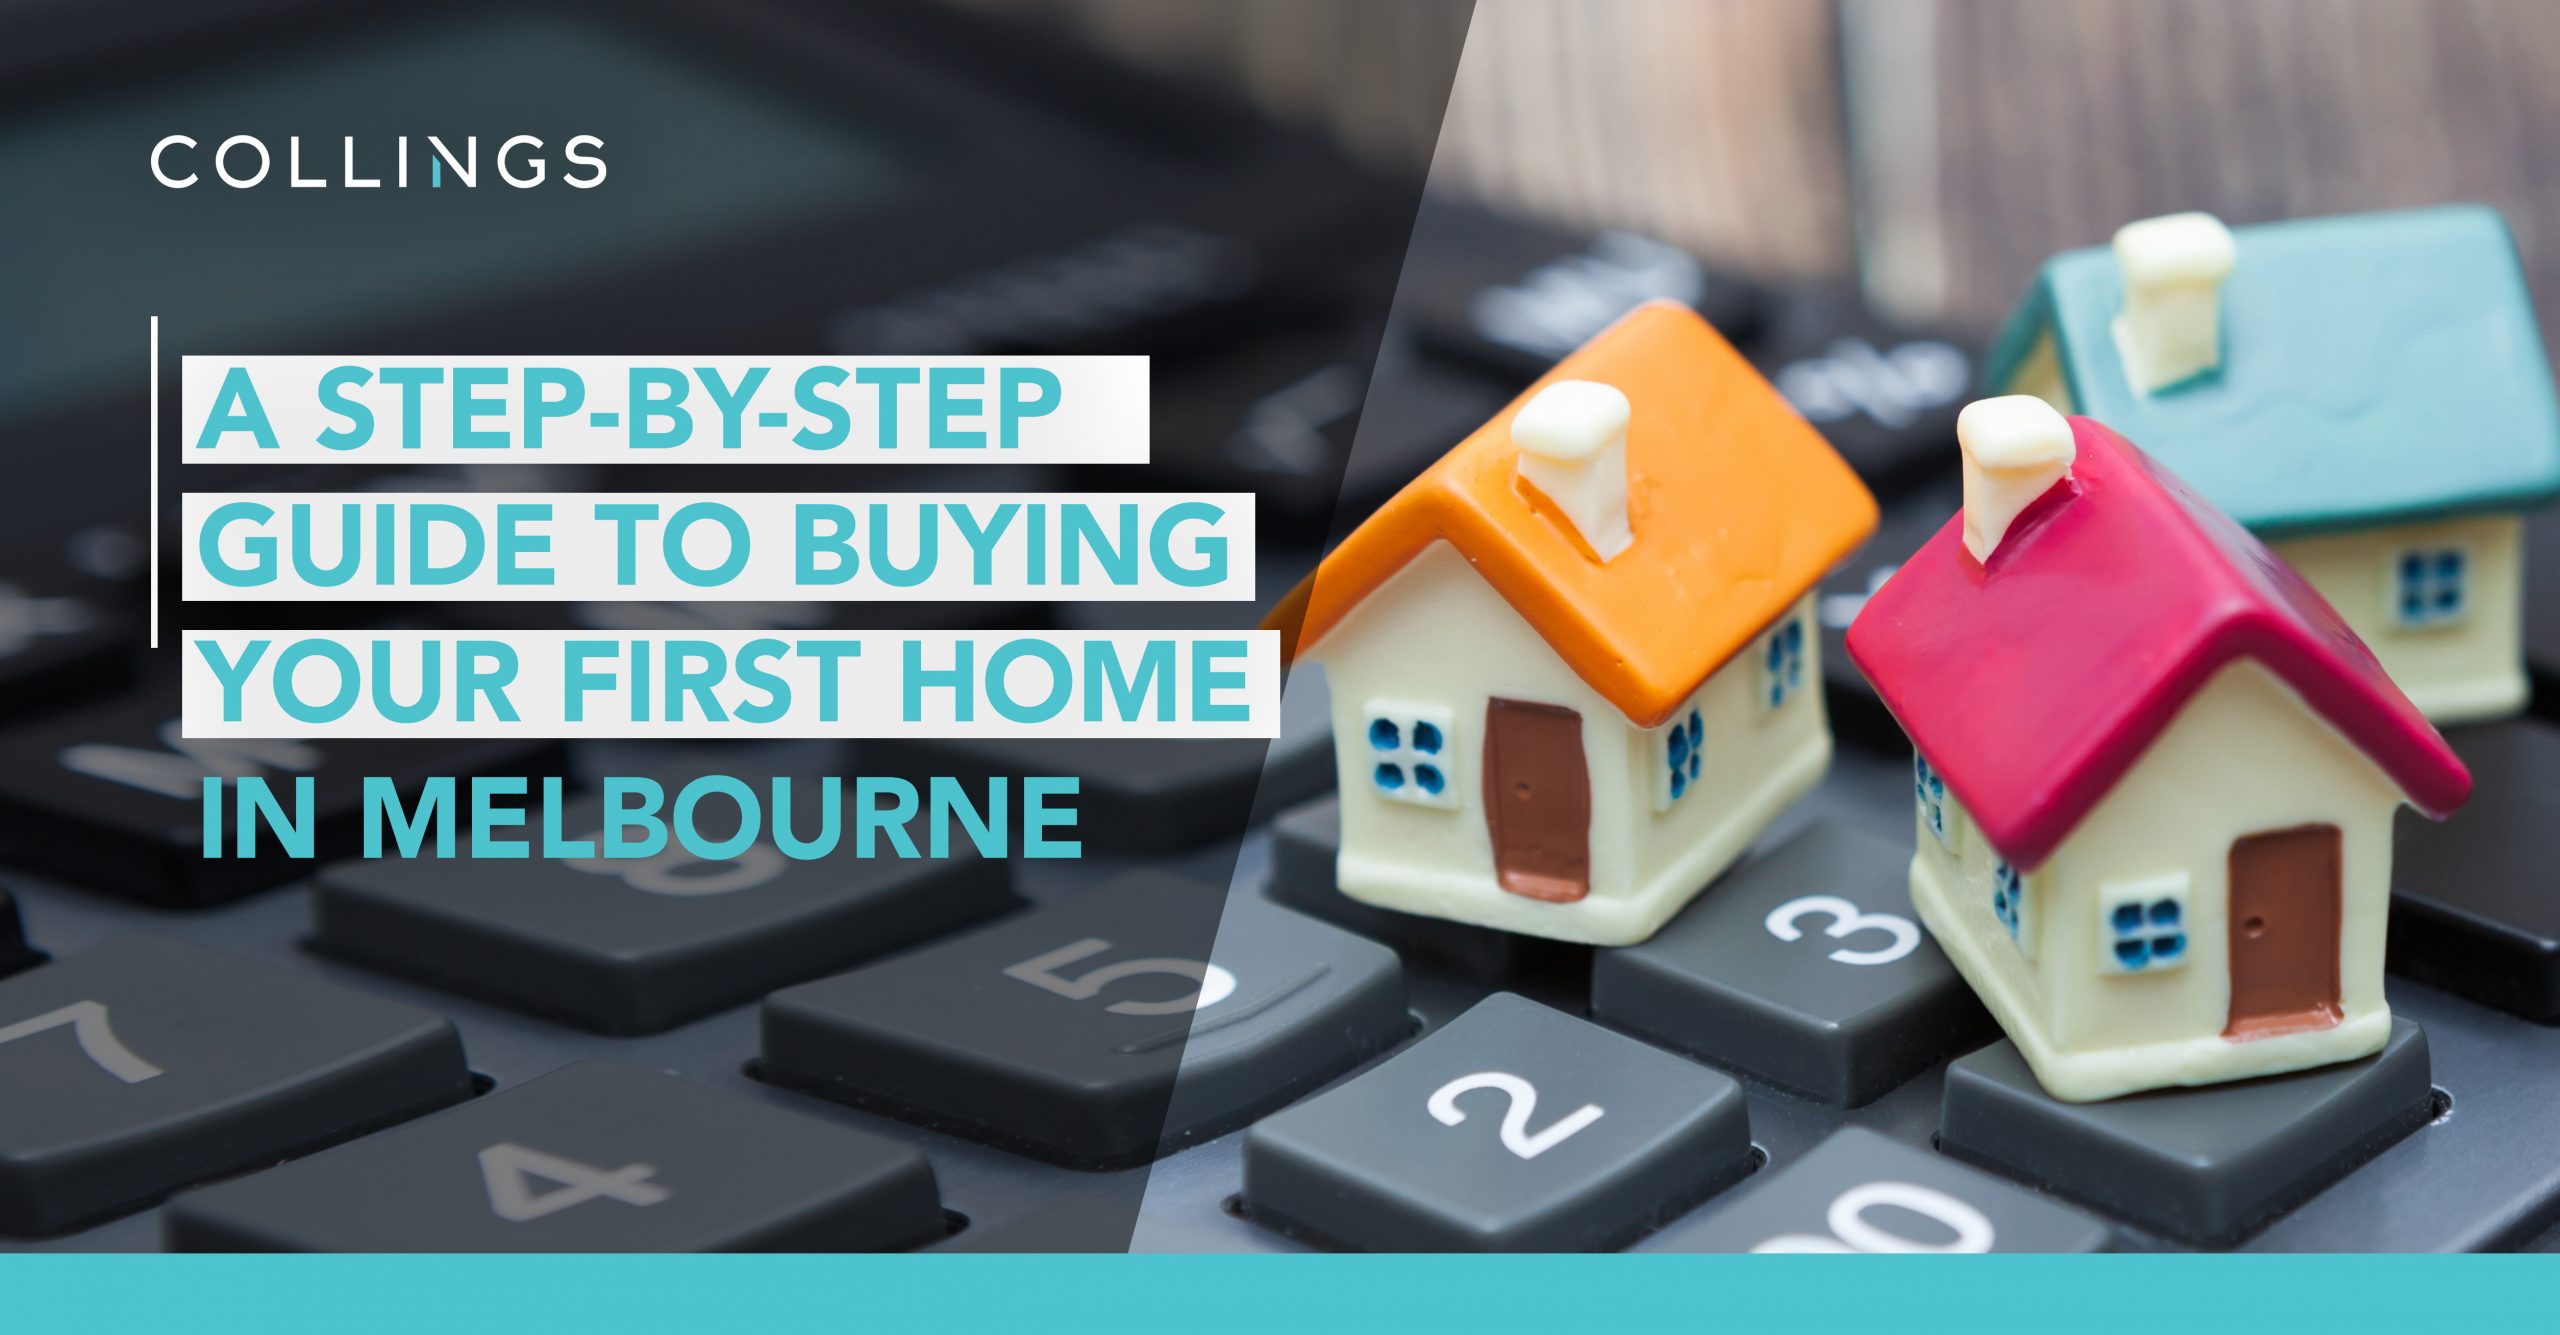 A Step-by-Step Guide to Buying Your First Home in Melbourne